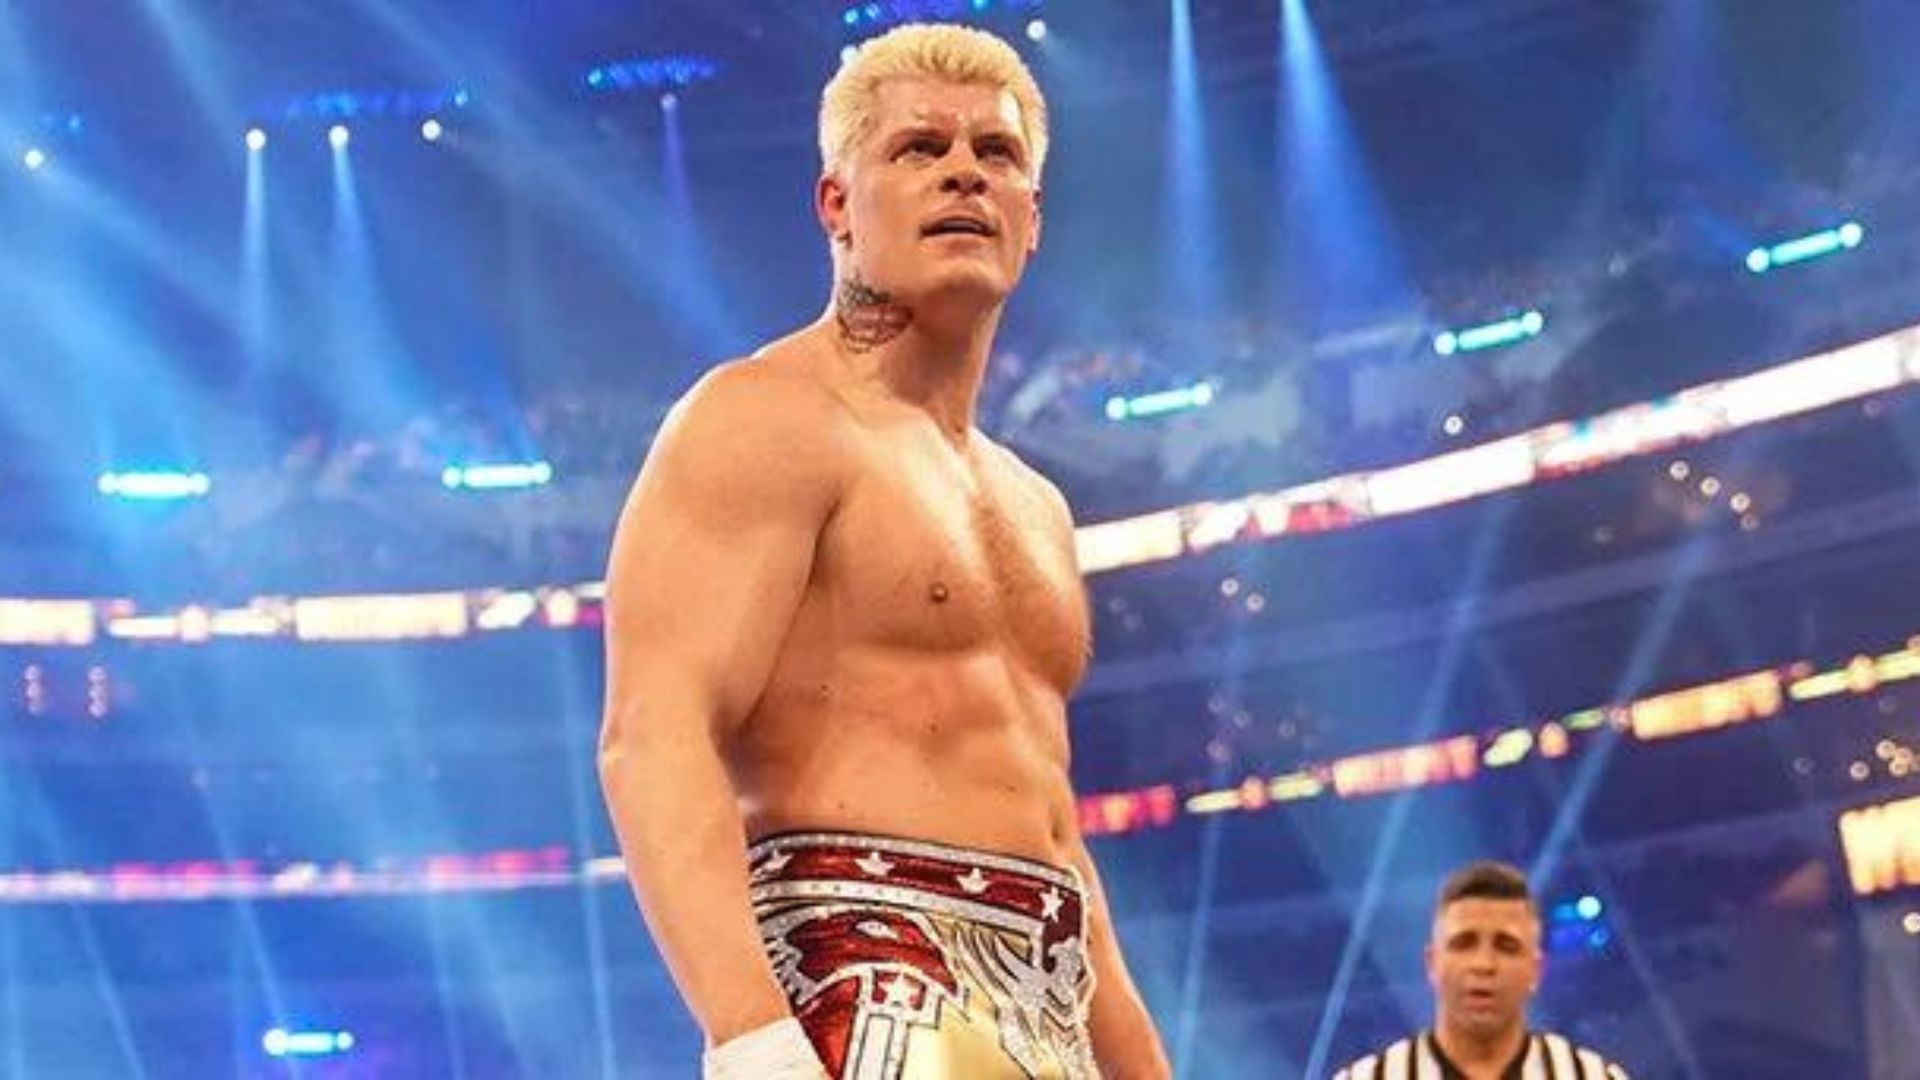 WWE RAW Superstar Cody Rhodes might already have a feud set for his return